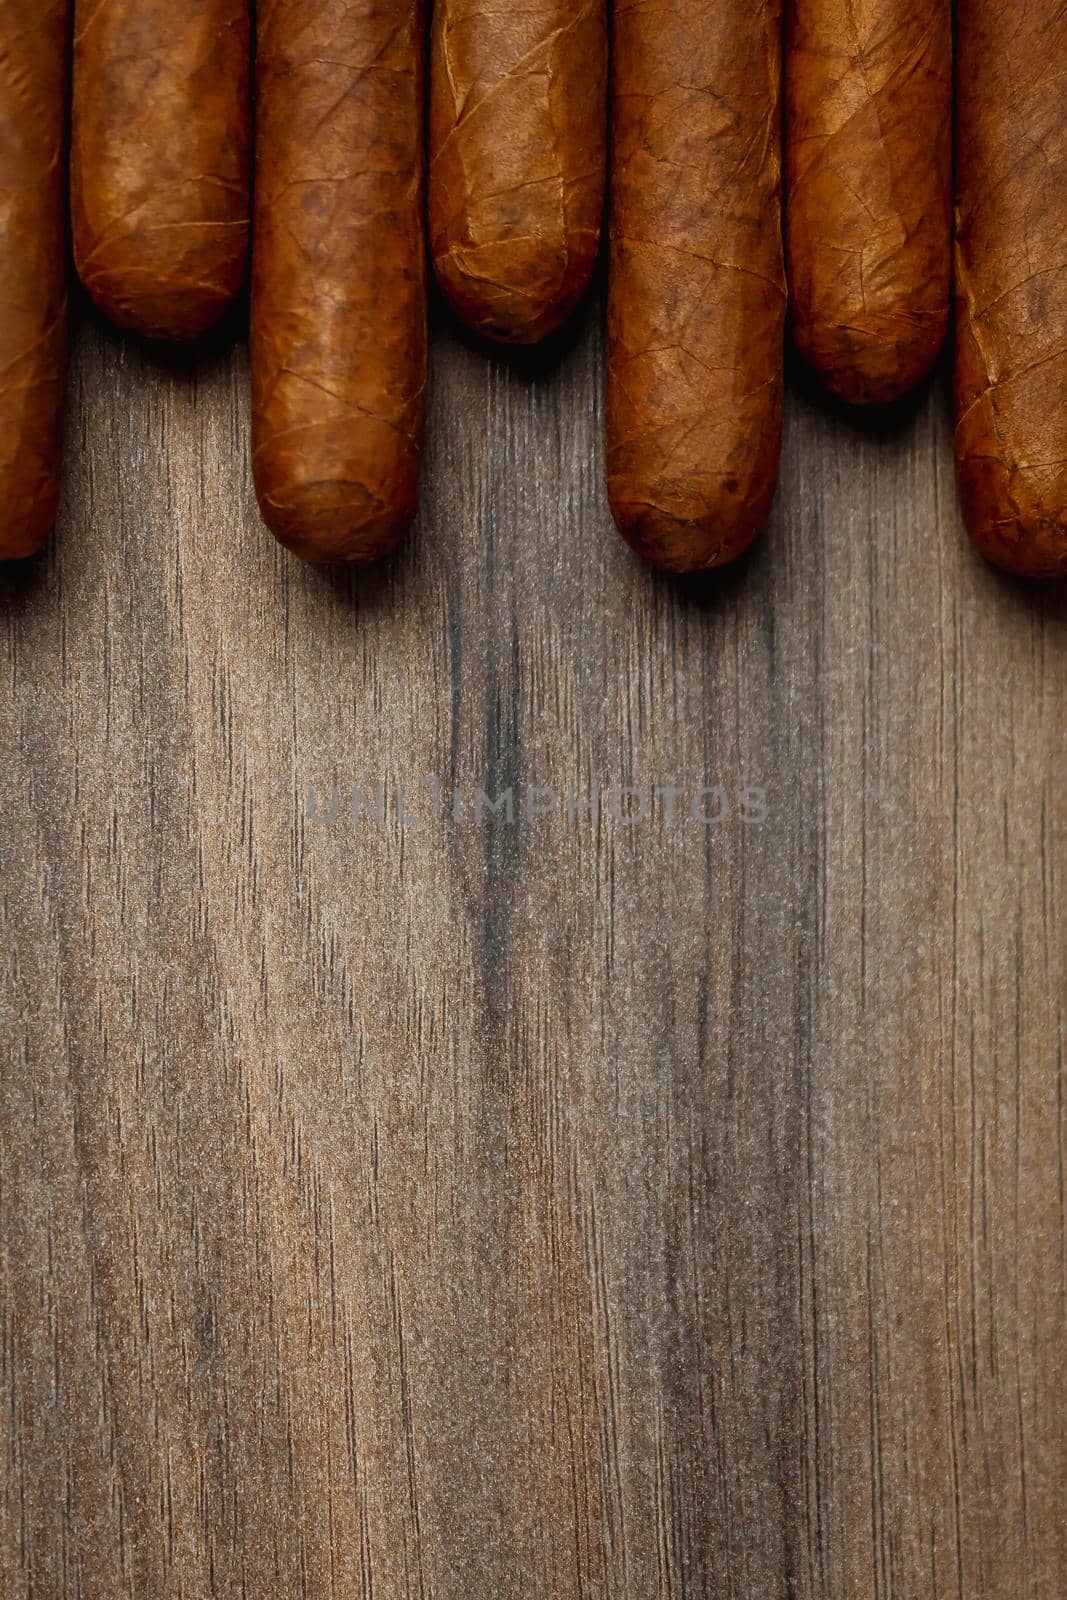 Cigars on the wooden background